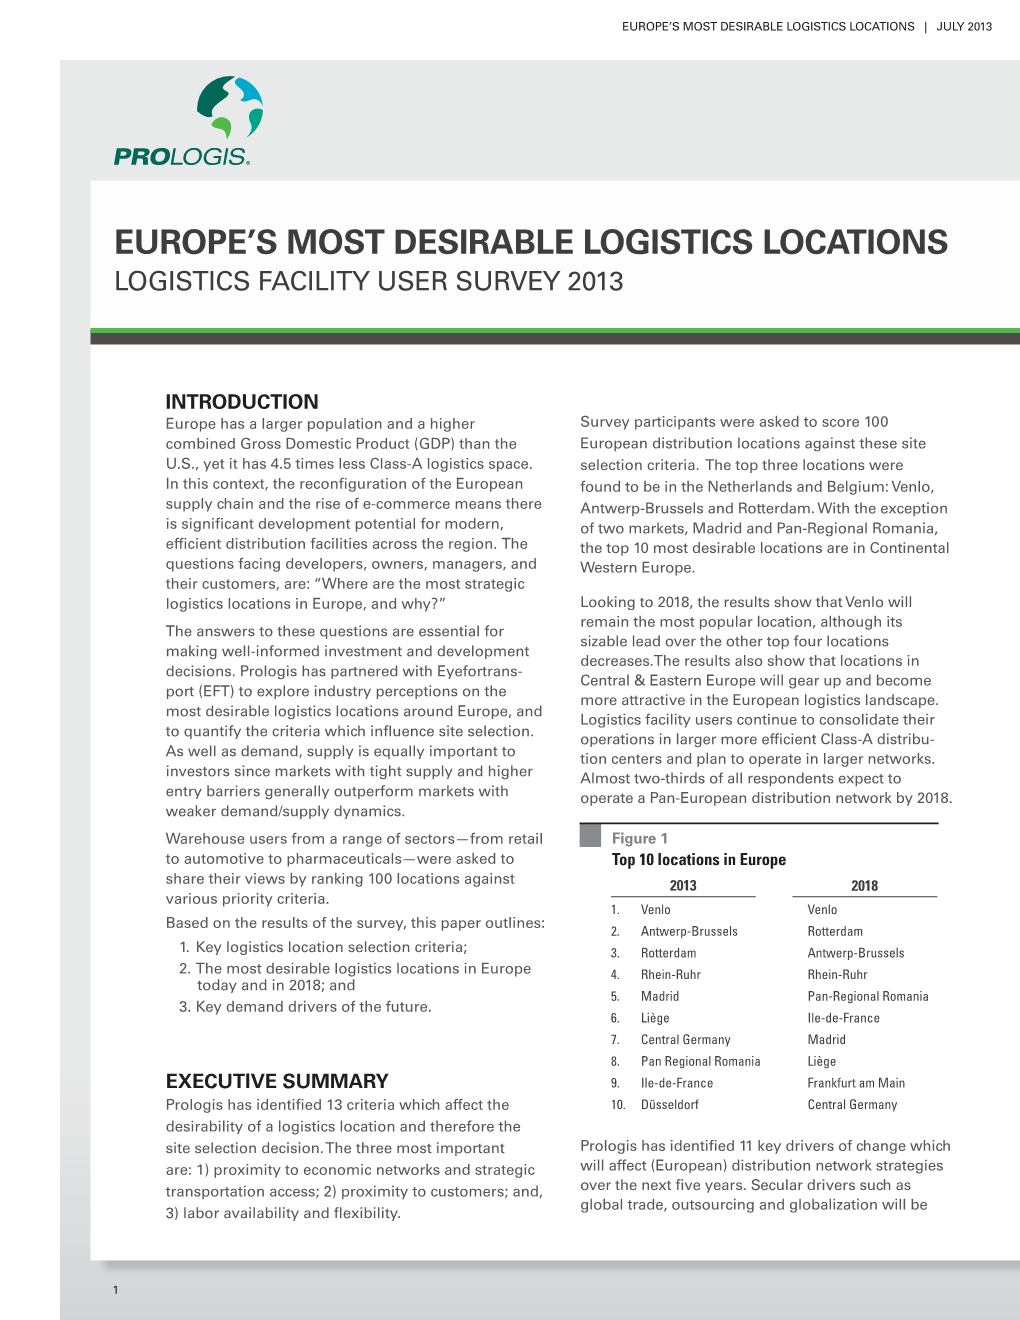 Europe's Most Desirable Logistics Locations